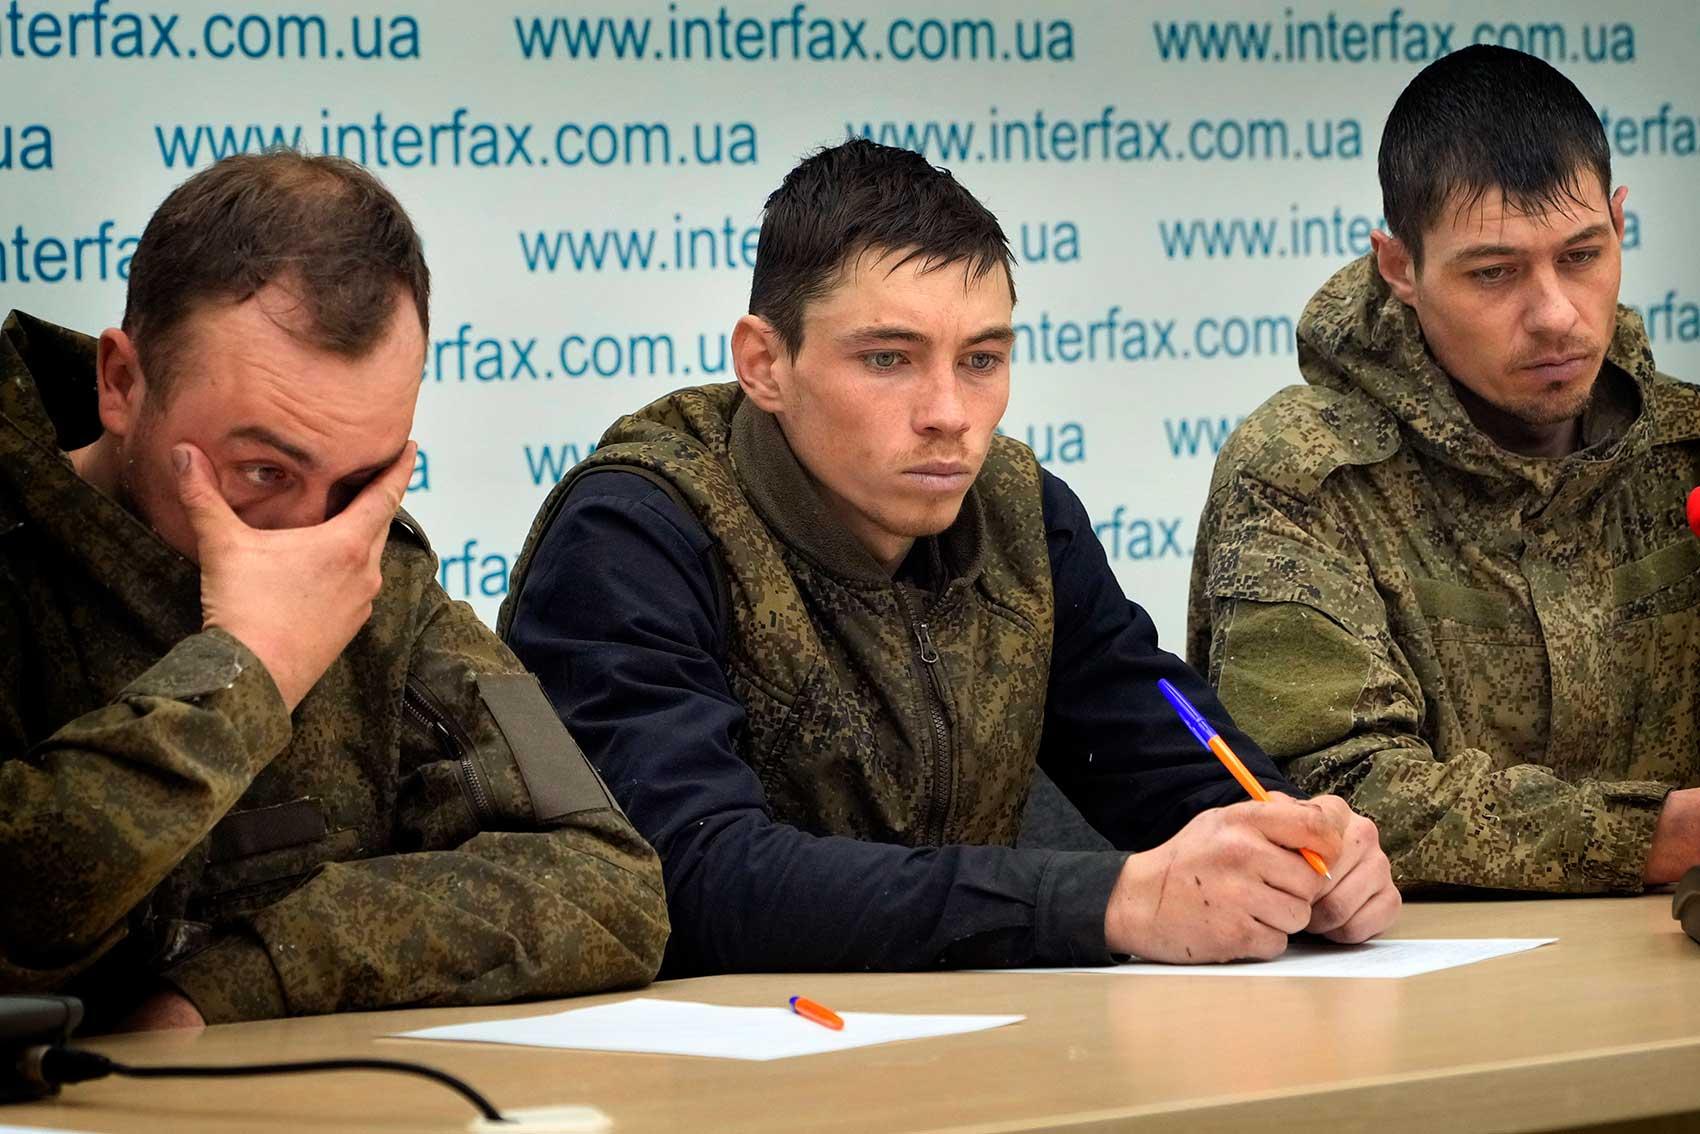 Three captured Russian soldiers sitting at table